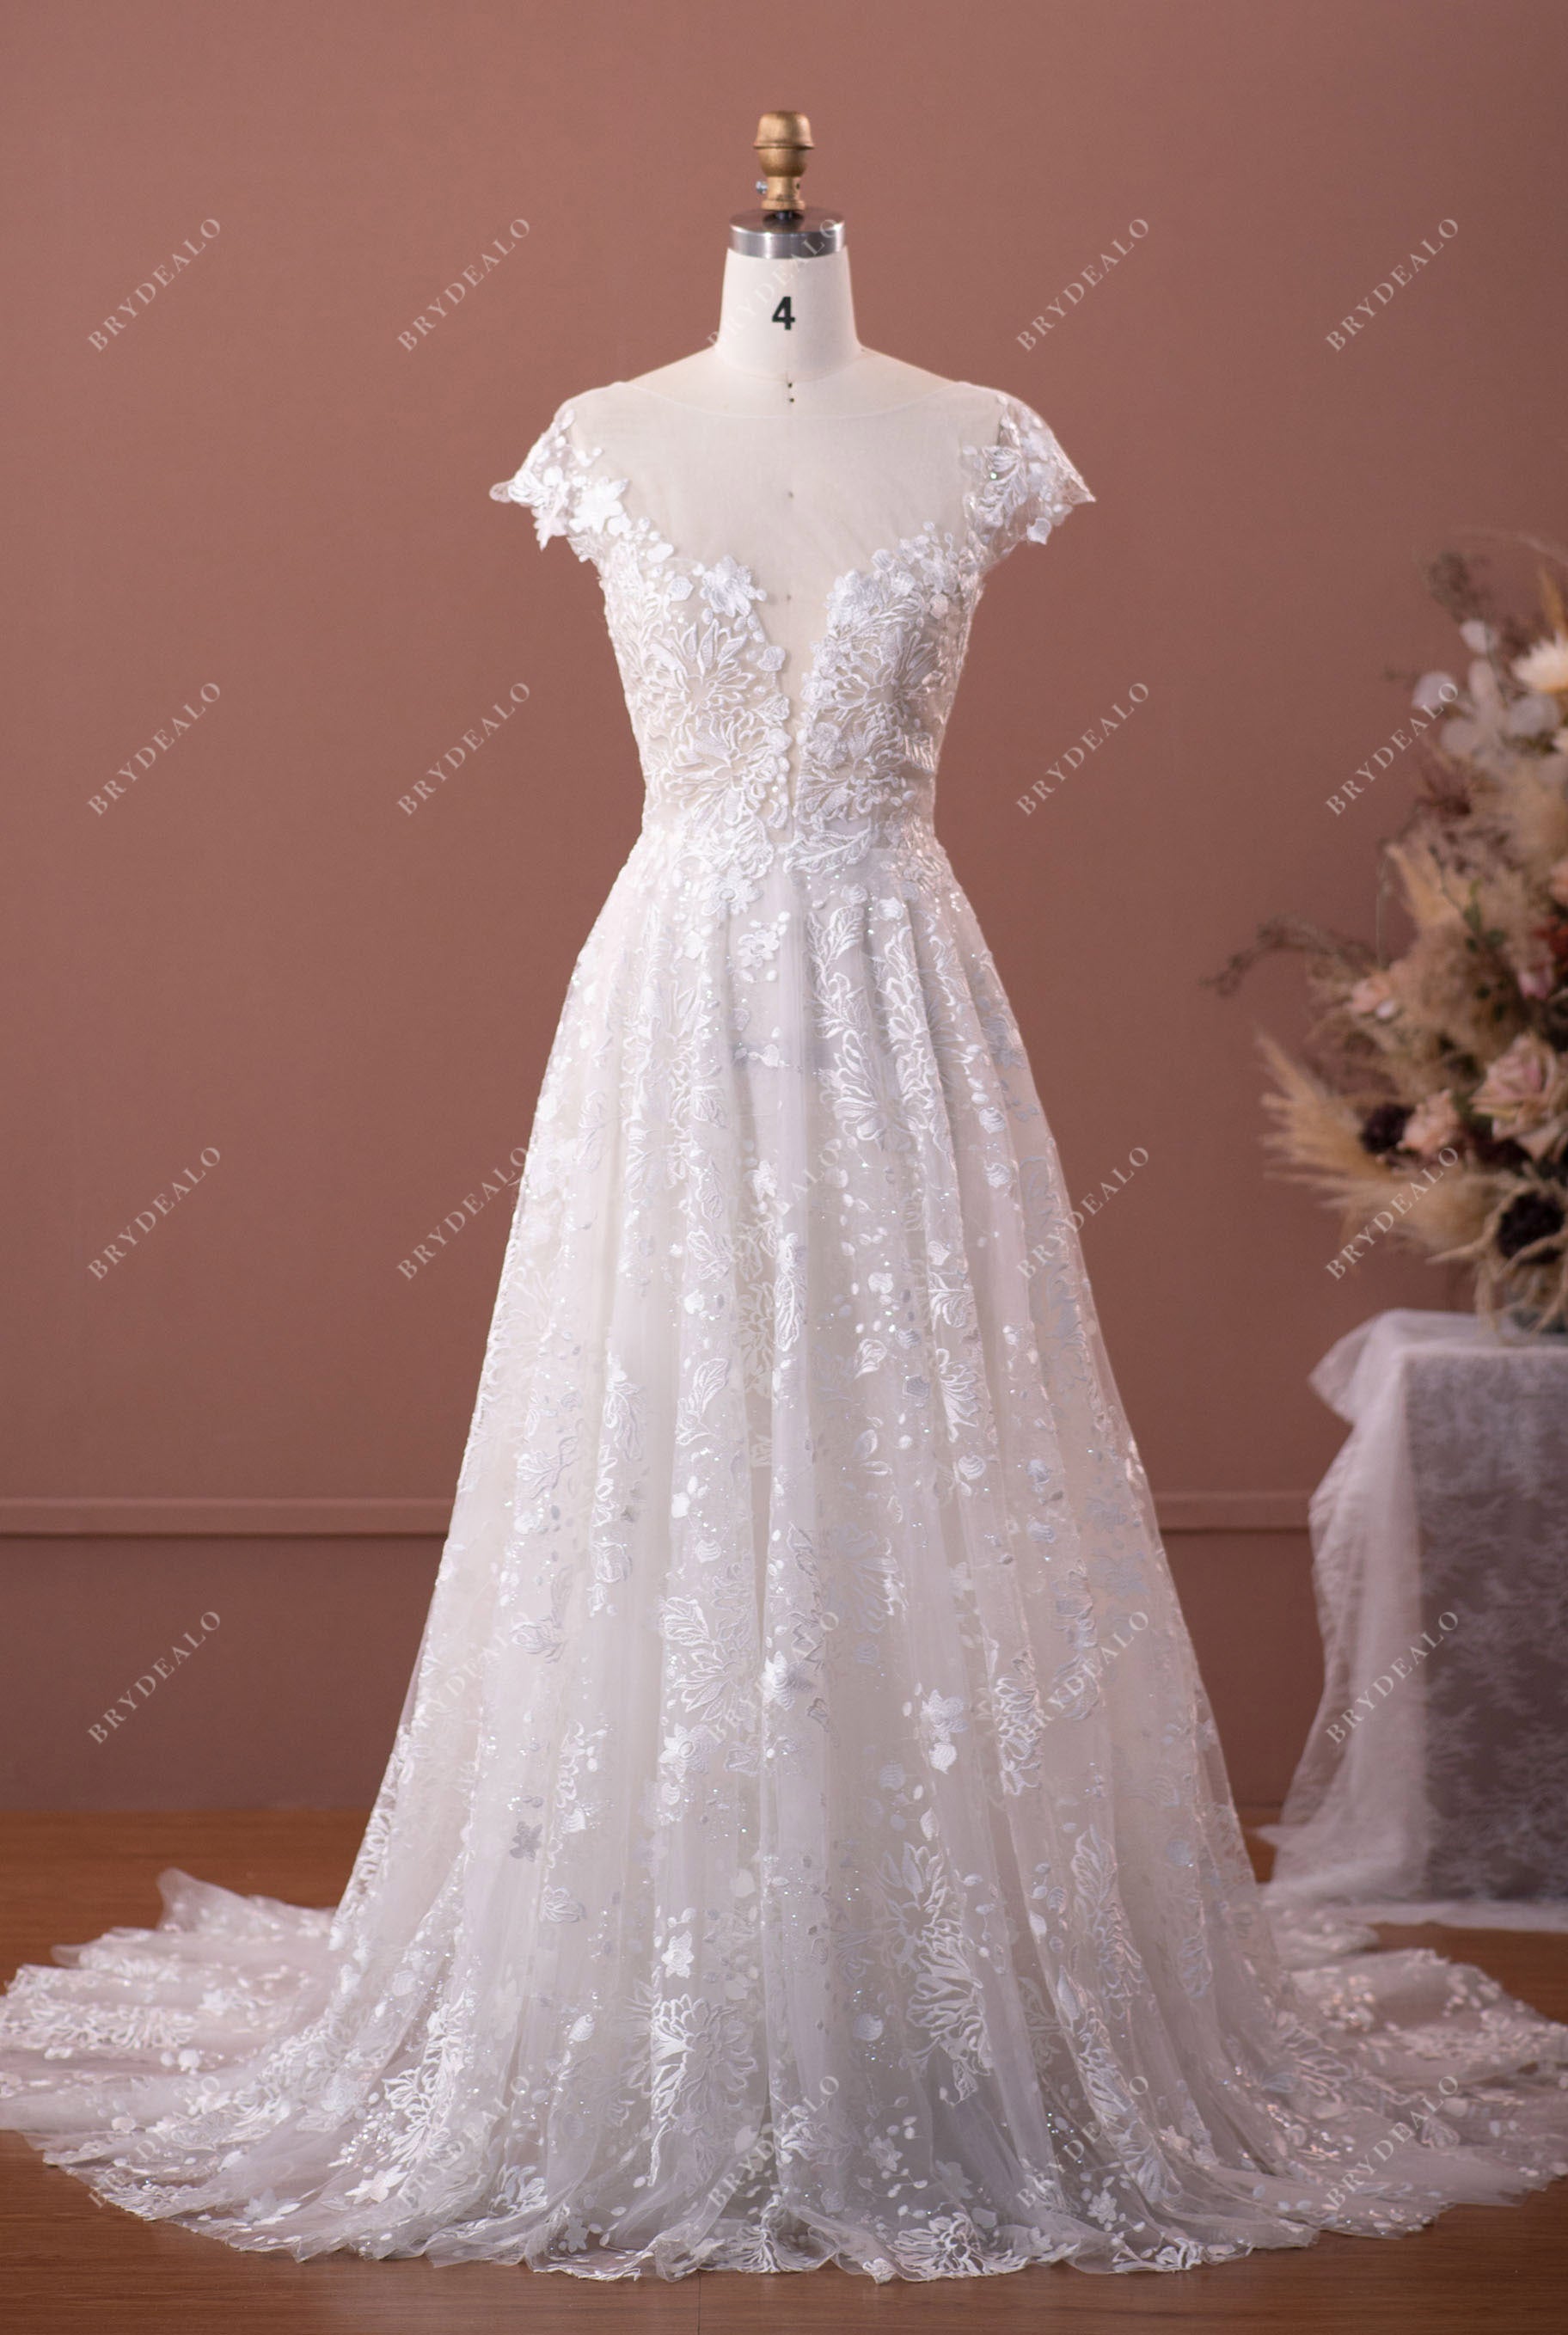 Beautiful Flower Lace Illusion Neck A-line Bridal Gown